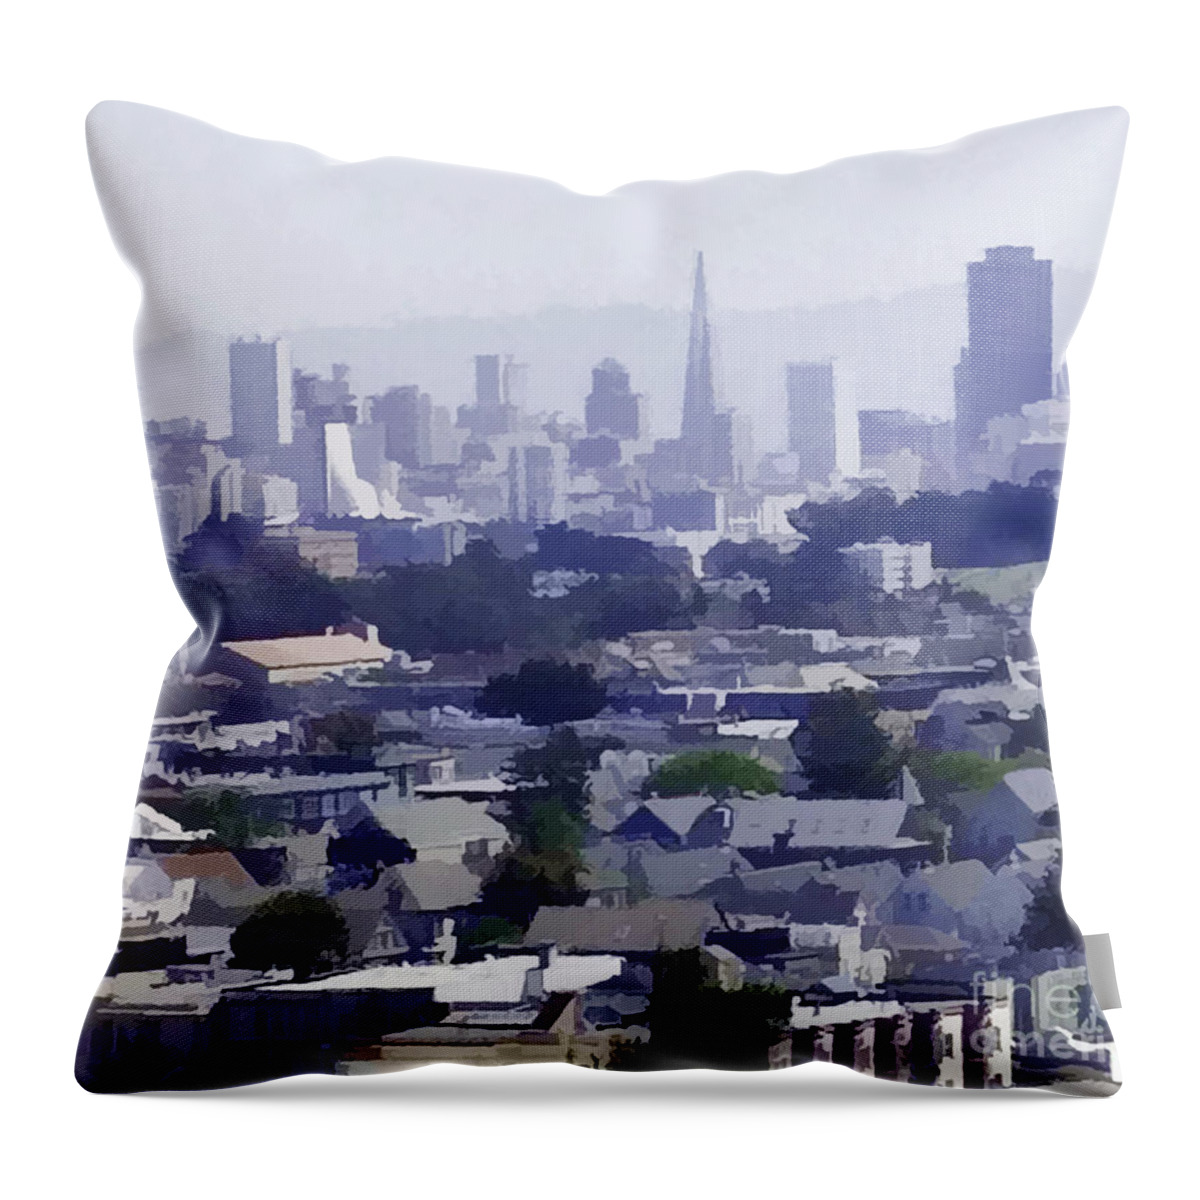 San Francisco Throw Pillow featuring the photograph Looking East Toward San Francisco by Joyce Creswell